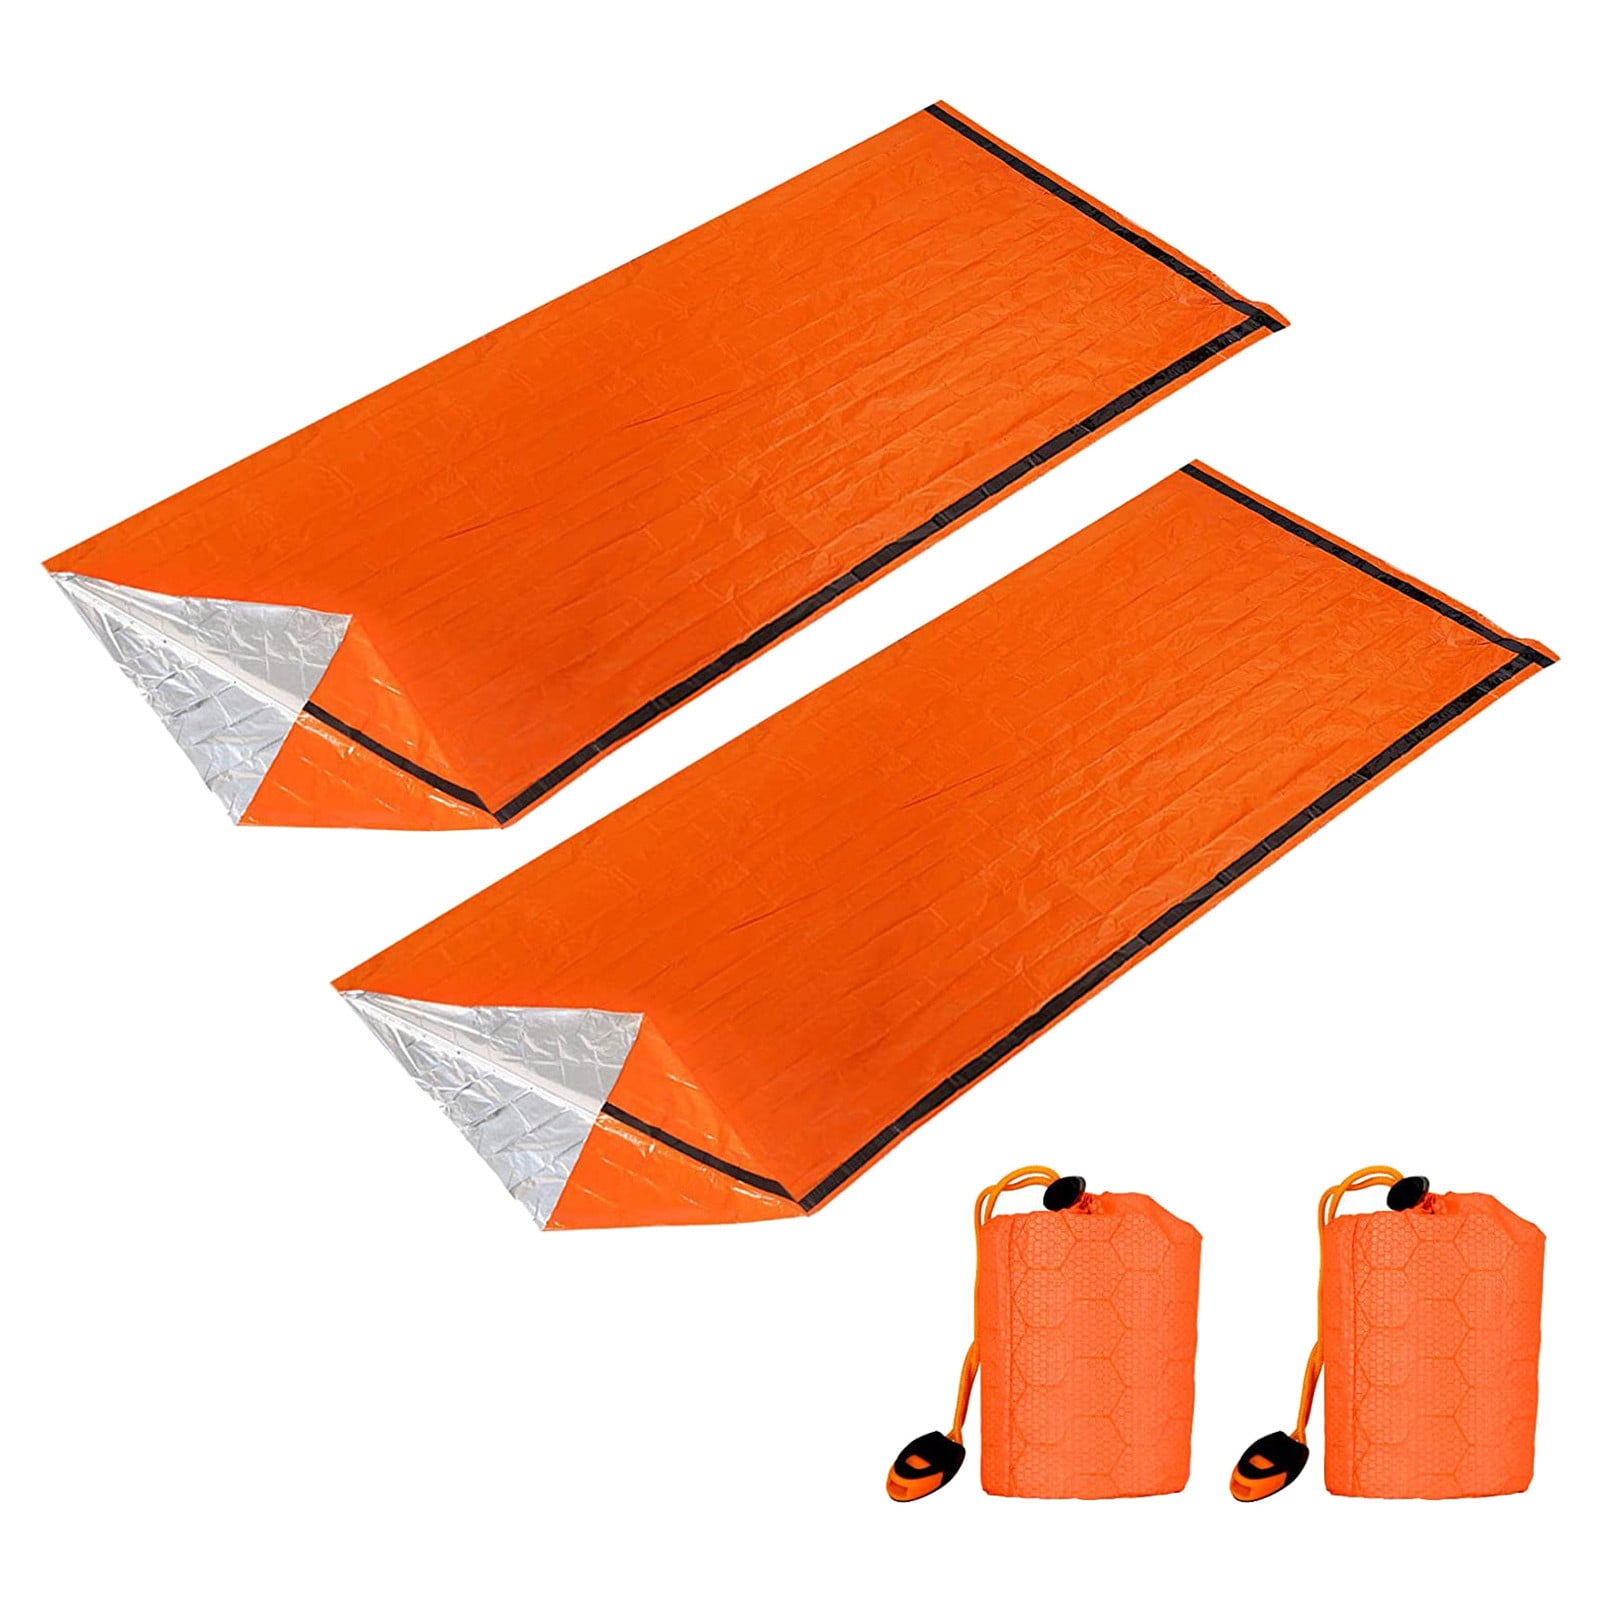 Details about   Outdoor Emergency Sleeping Bag Thermal Waterproof Survival Travel Camping Q1I8 